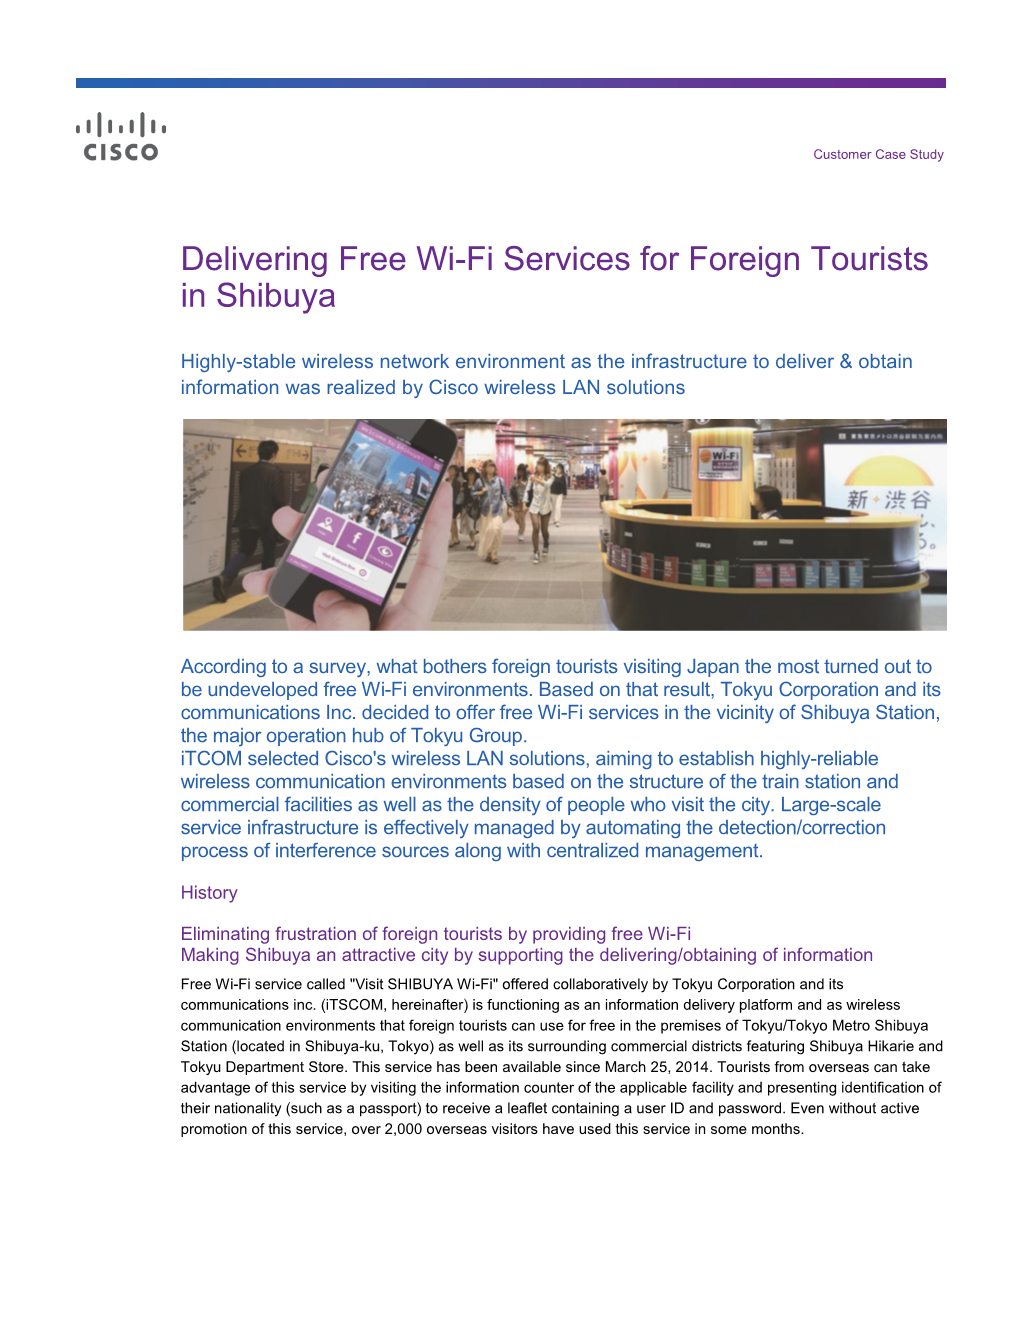 Delivering Free Wi-Fi Services for Foreign Tourists in Shibuya